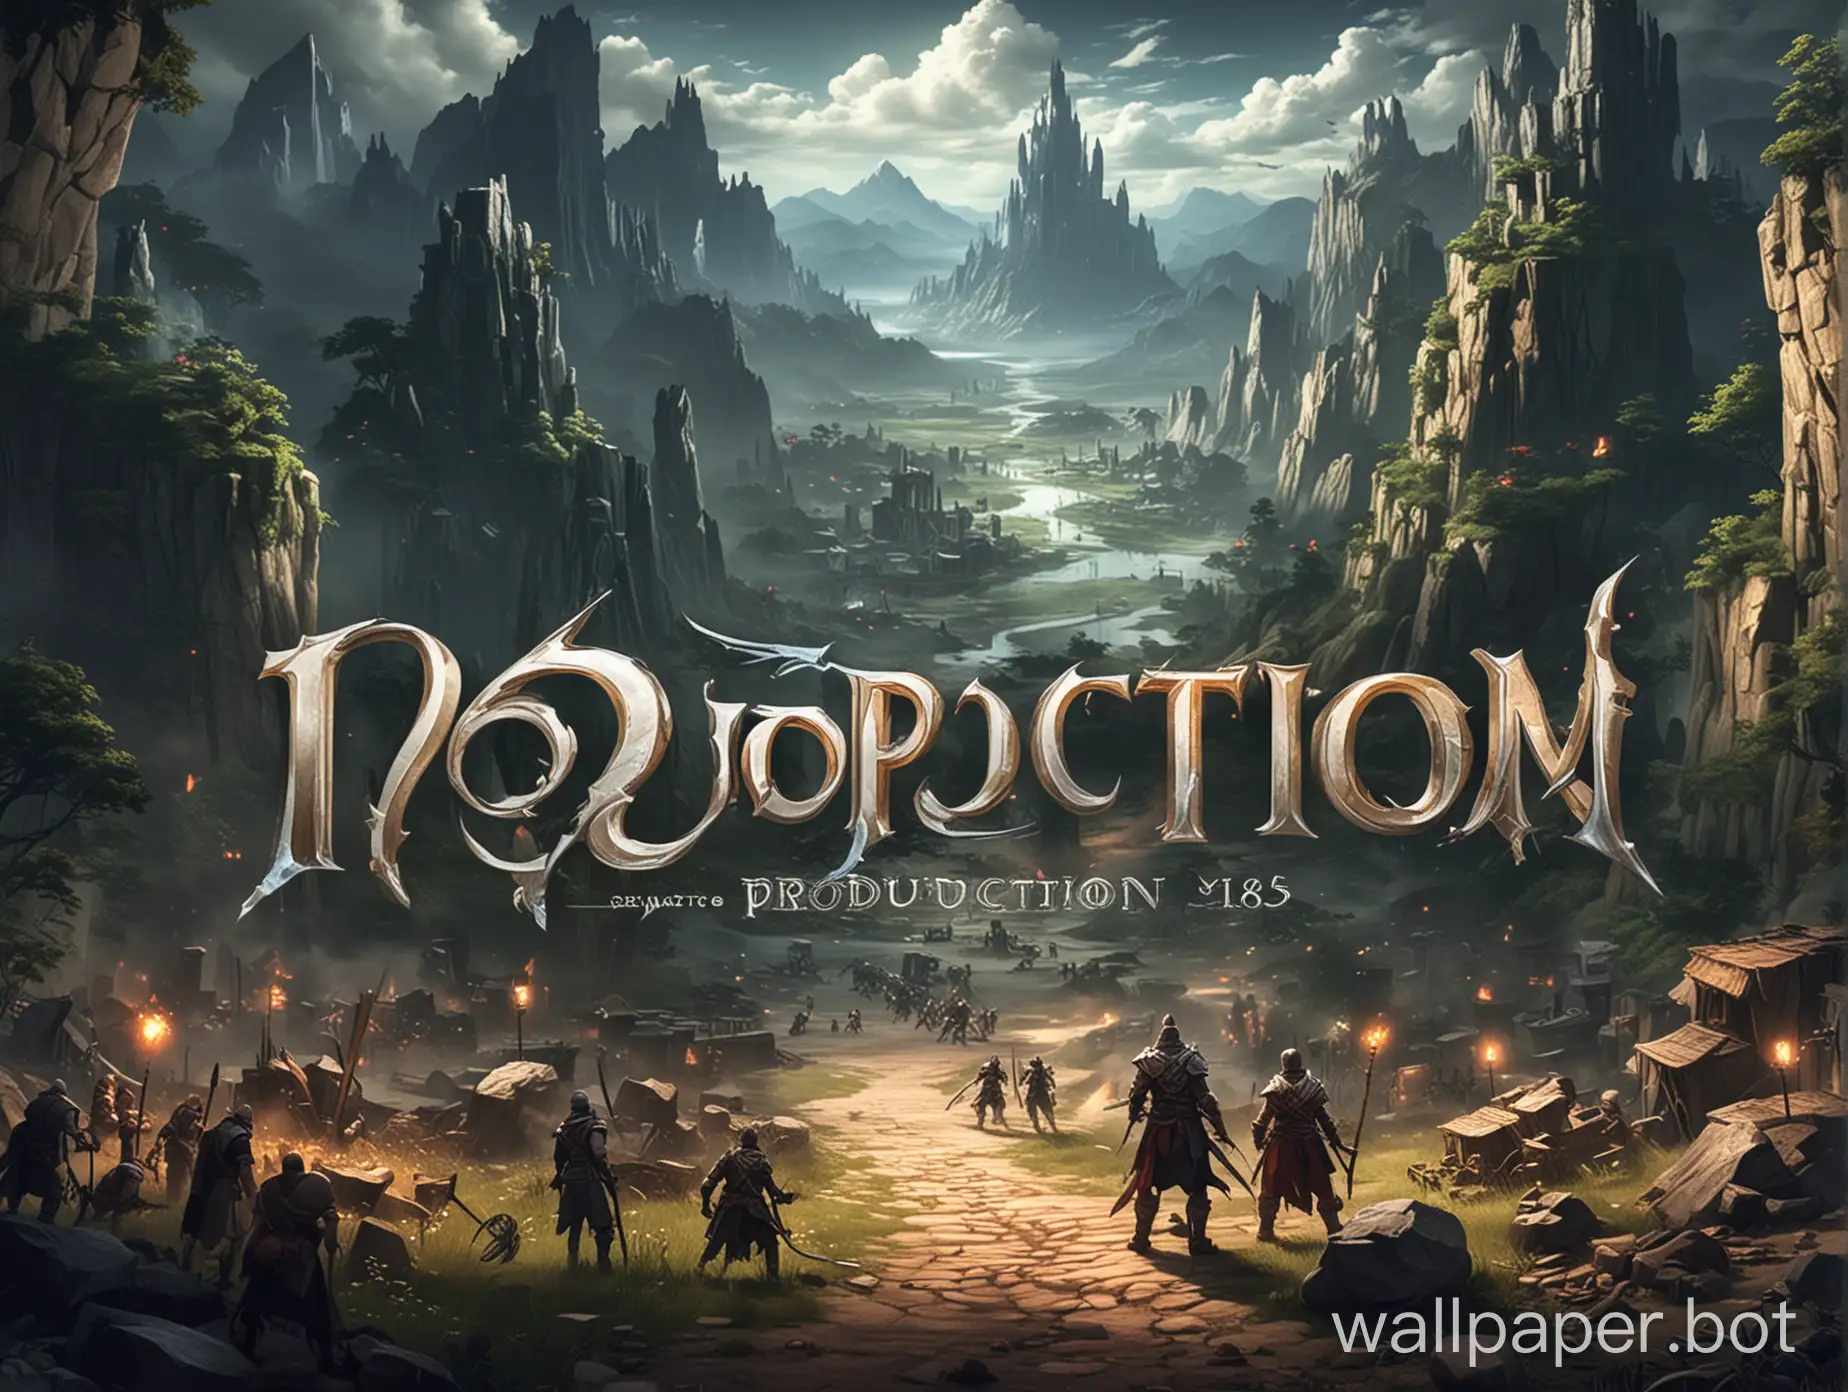 Fantasy like mmo rpg wallpaper containing the title "16 PRODUCTION"
